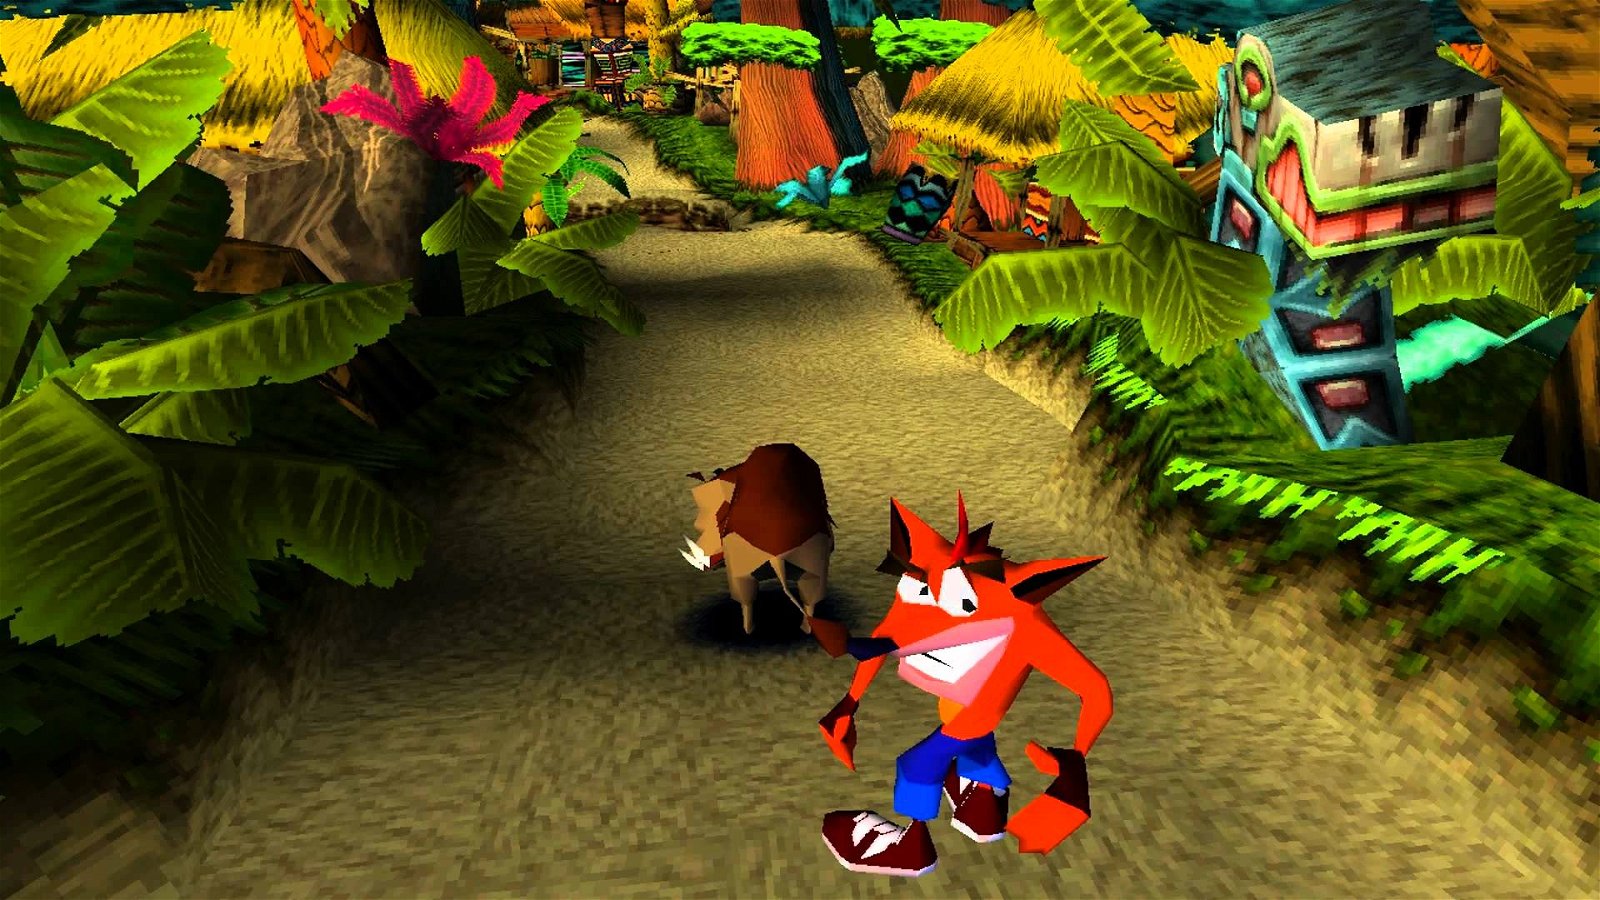 No, Sony Does Not Own Crash Bandicoot